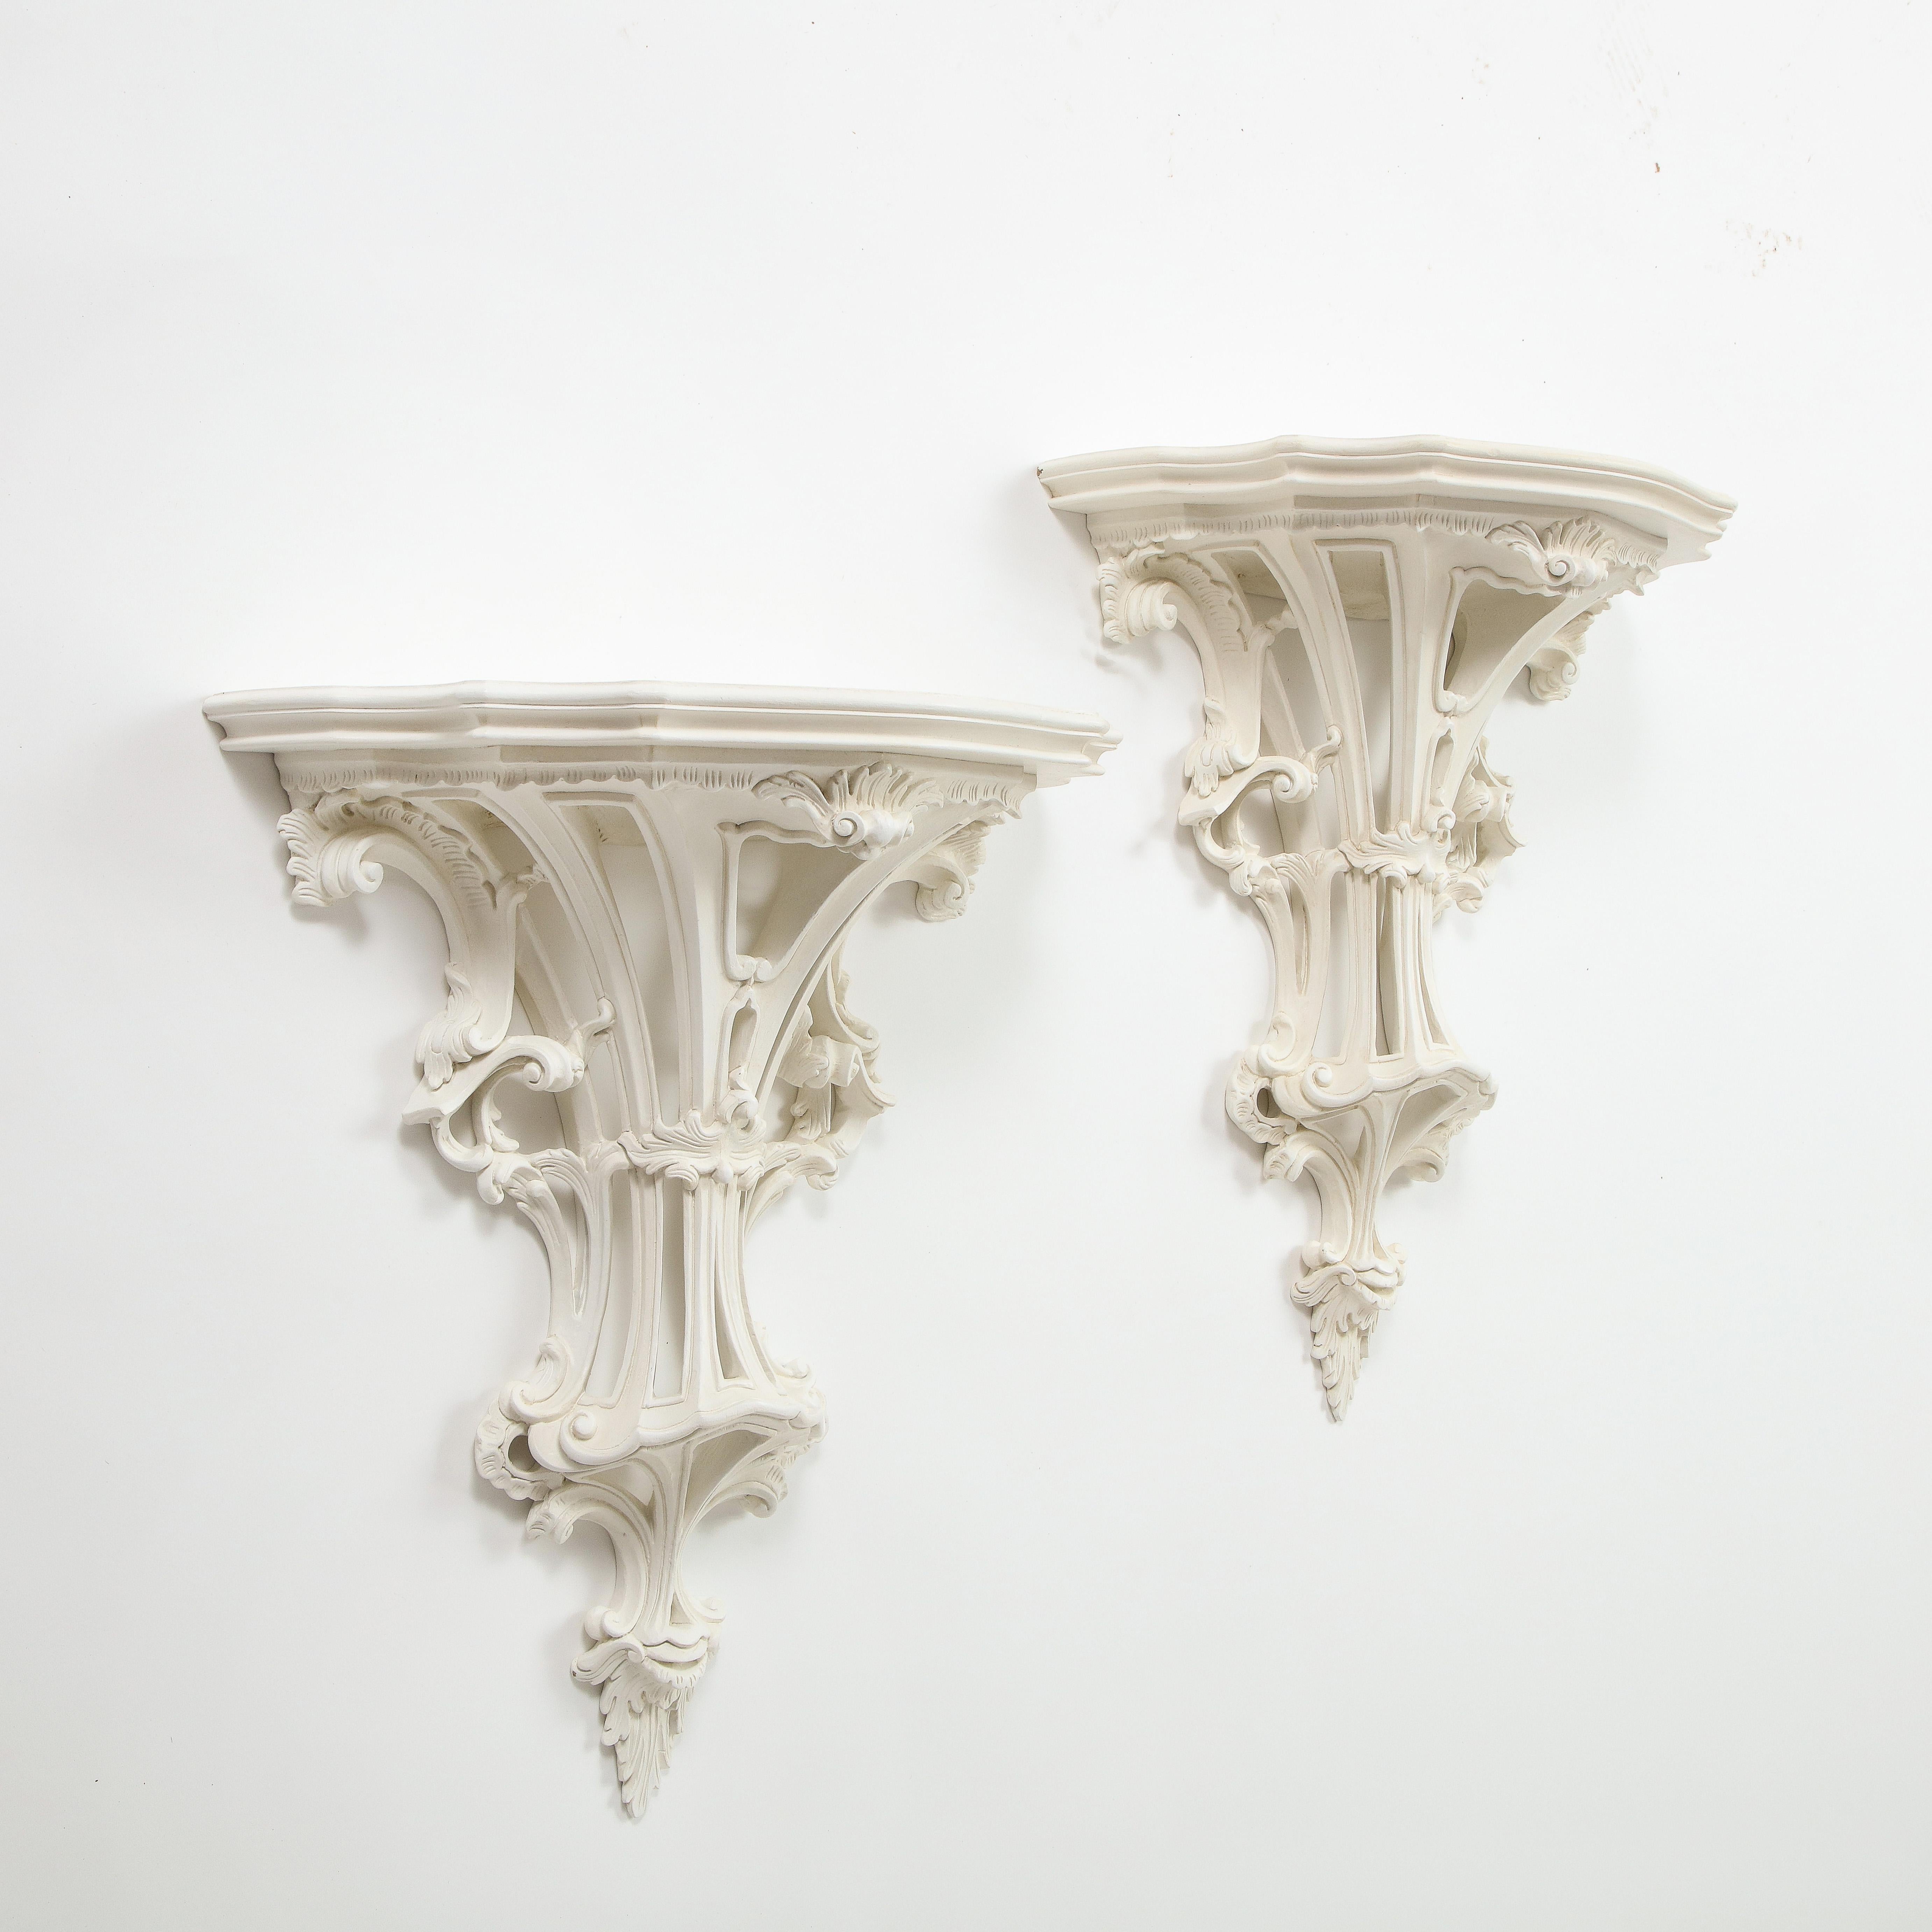 Each with shaped shelf over a tapering base pierced and elaborately carved with foliate C-scrolls and rocaille decoration.

Collection of Mario Buatta, New York, NY.